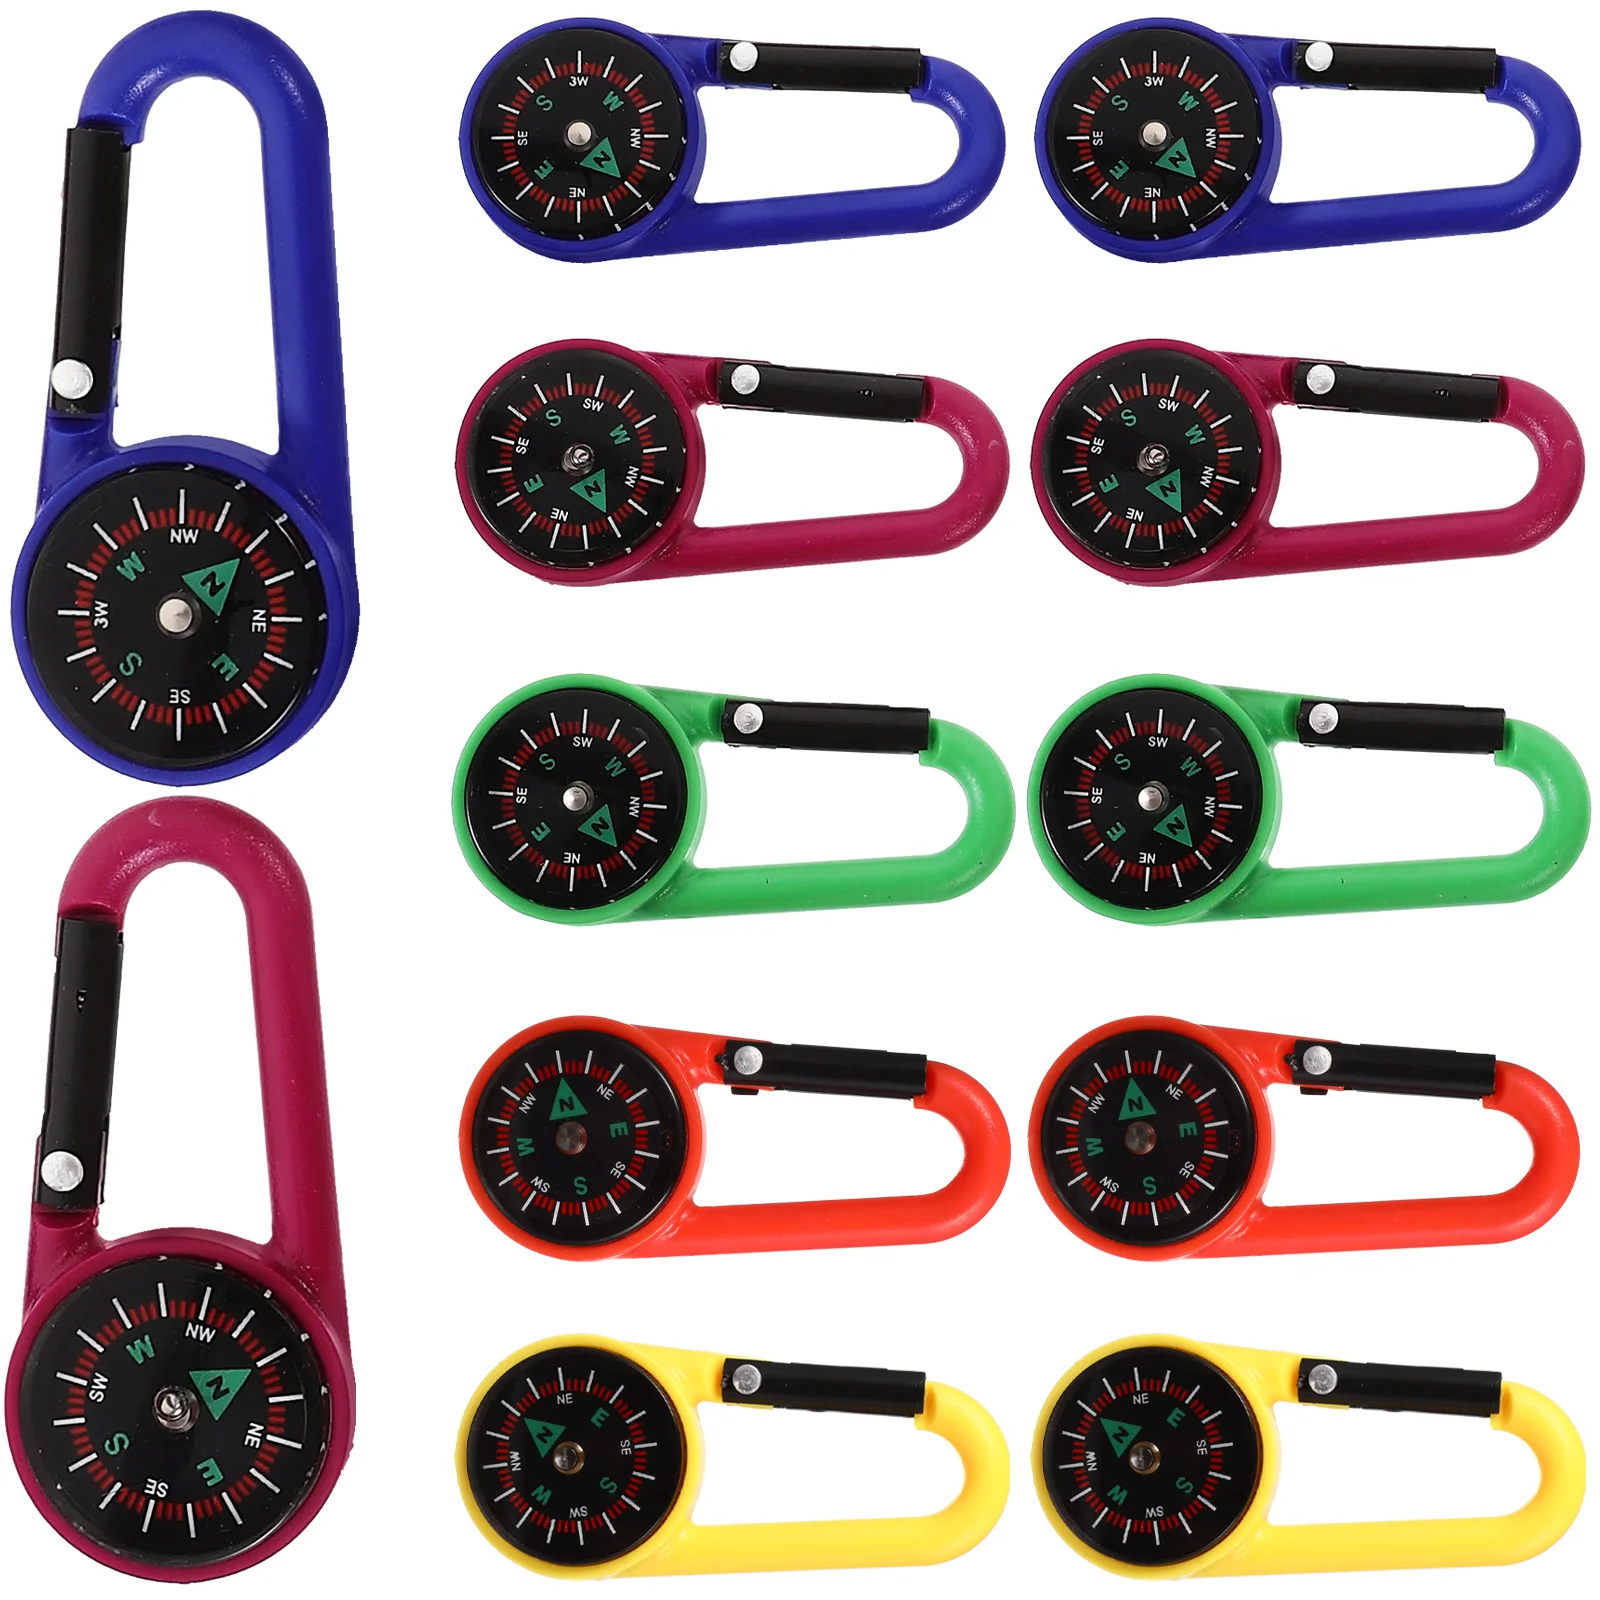 

12PCS Compass Keychain Carabiner Compass Keyring Pocket Compass Survival Supplies for Hiking Climbing Outdoor